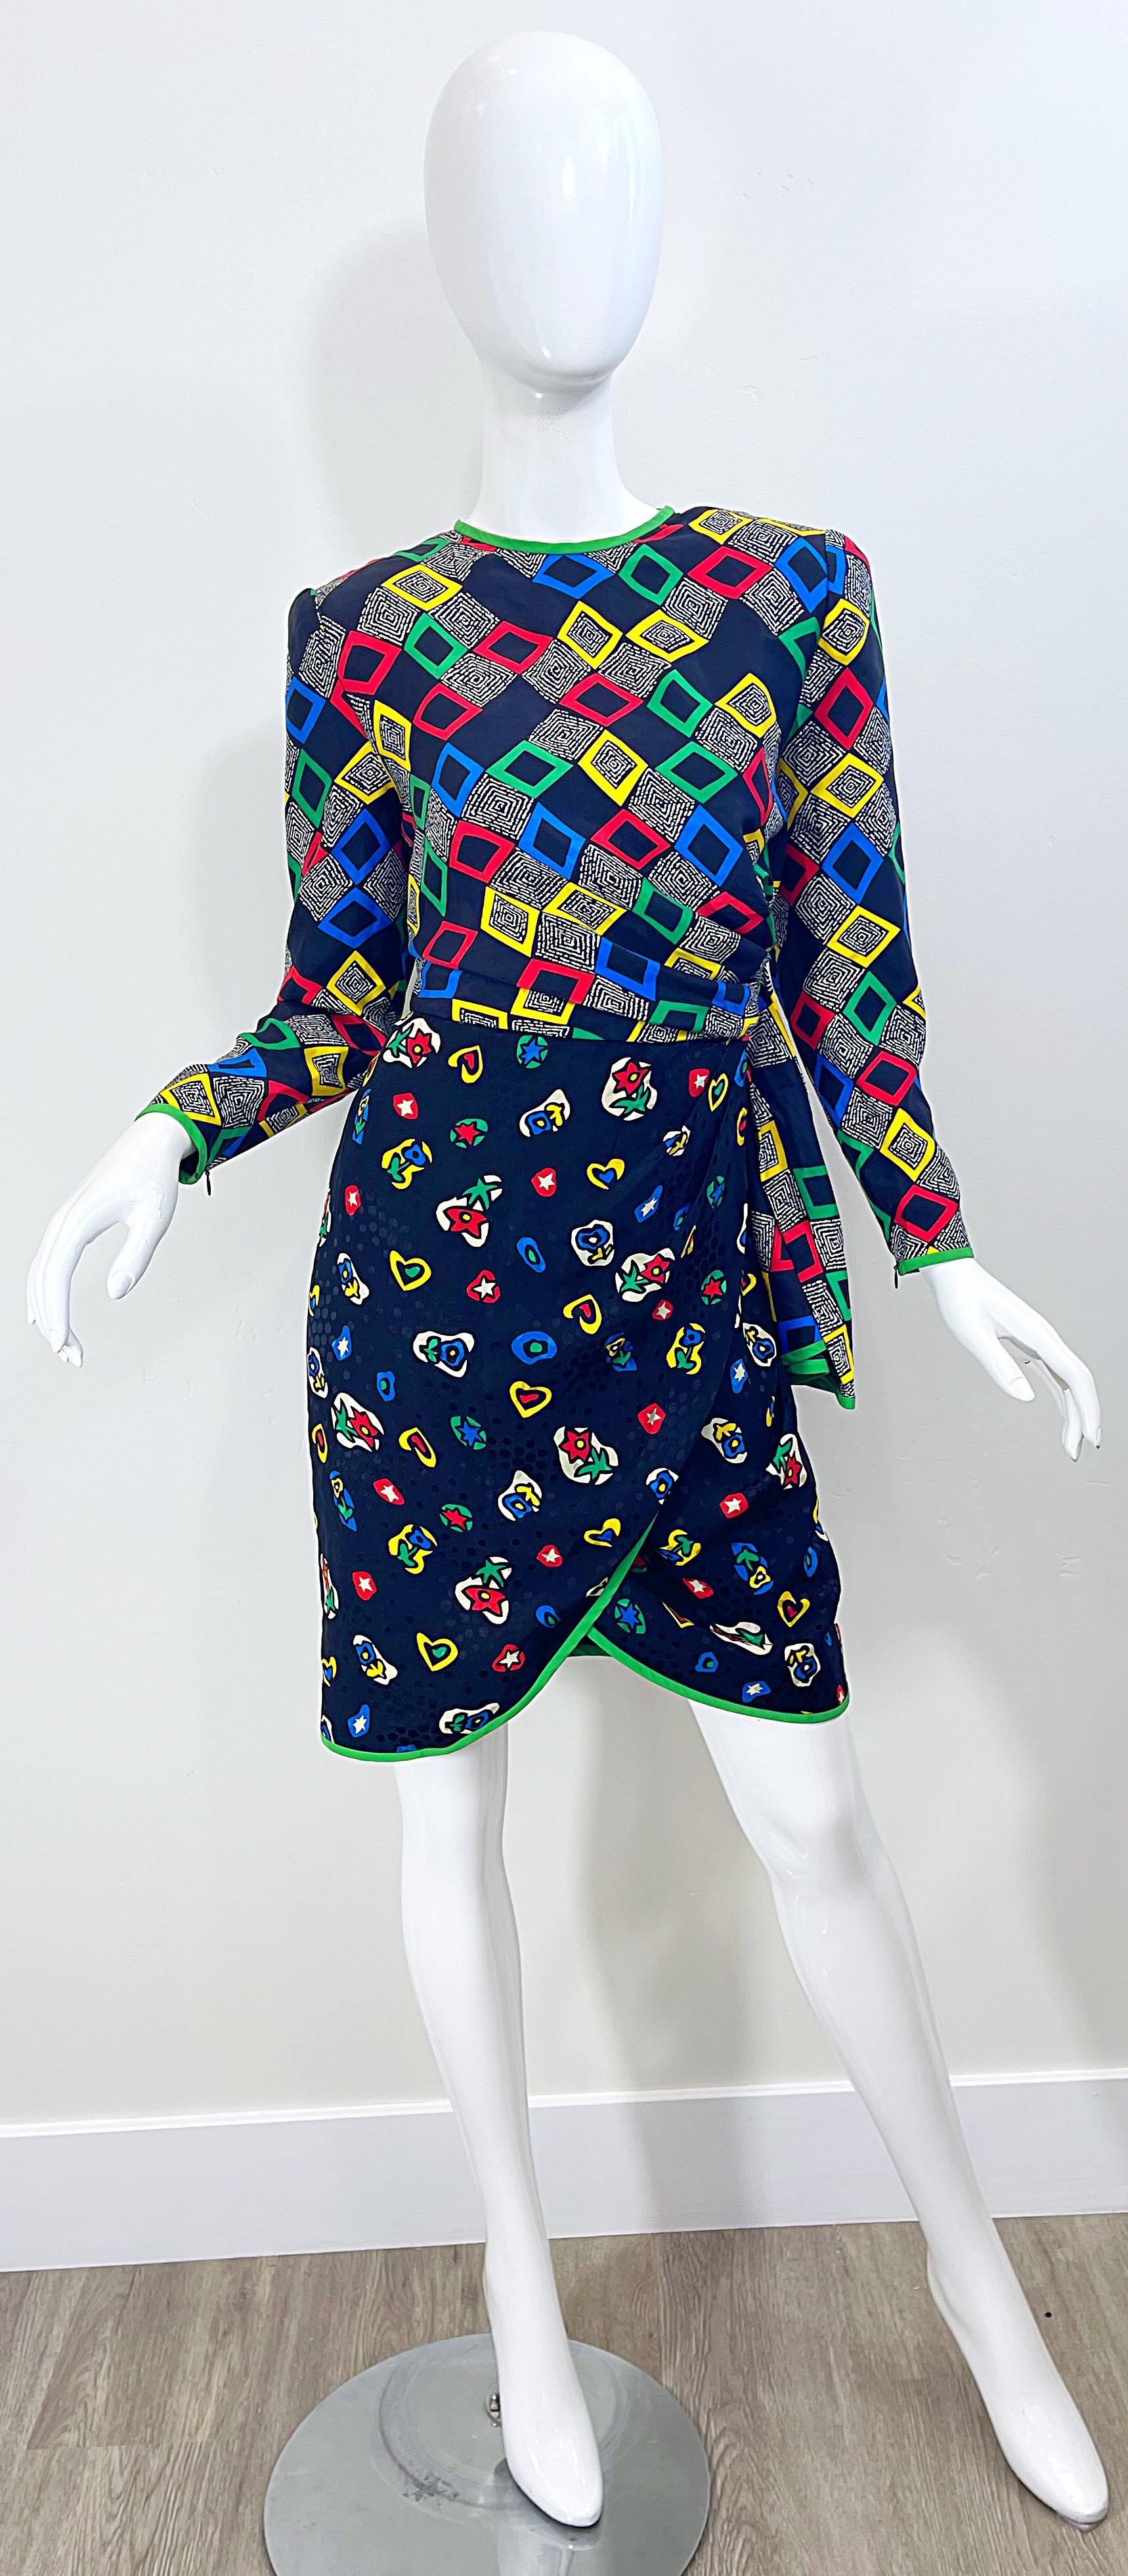 Chic 1980s STANLEY PLATOS / MARTIN ROSS abstract hearts and flower novelty print long sleeve silk dress ! Bodice features diamond square shapes in blue, red, green, yellow, black and white. Skirt has hearts and flowers scattered throughout. Hidden